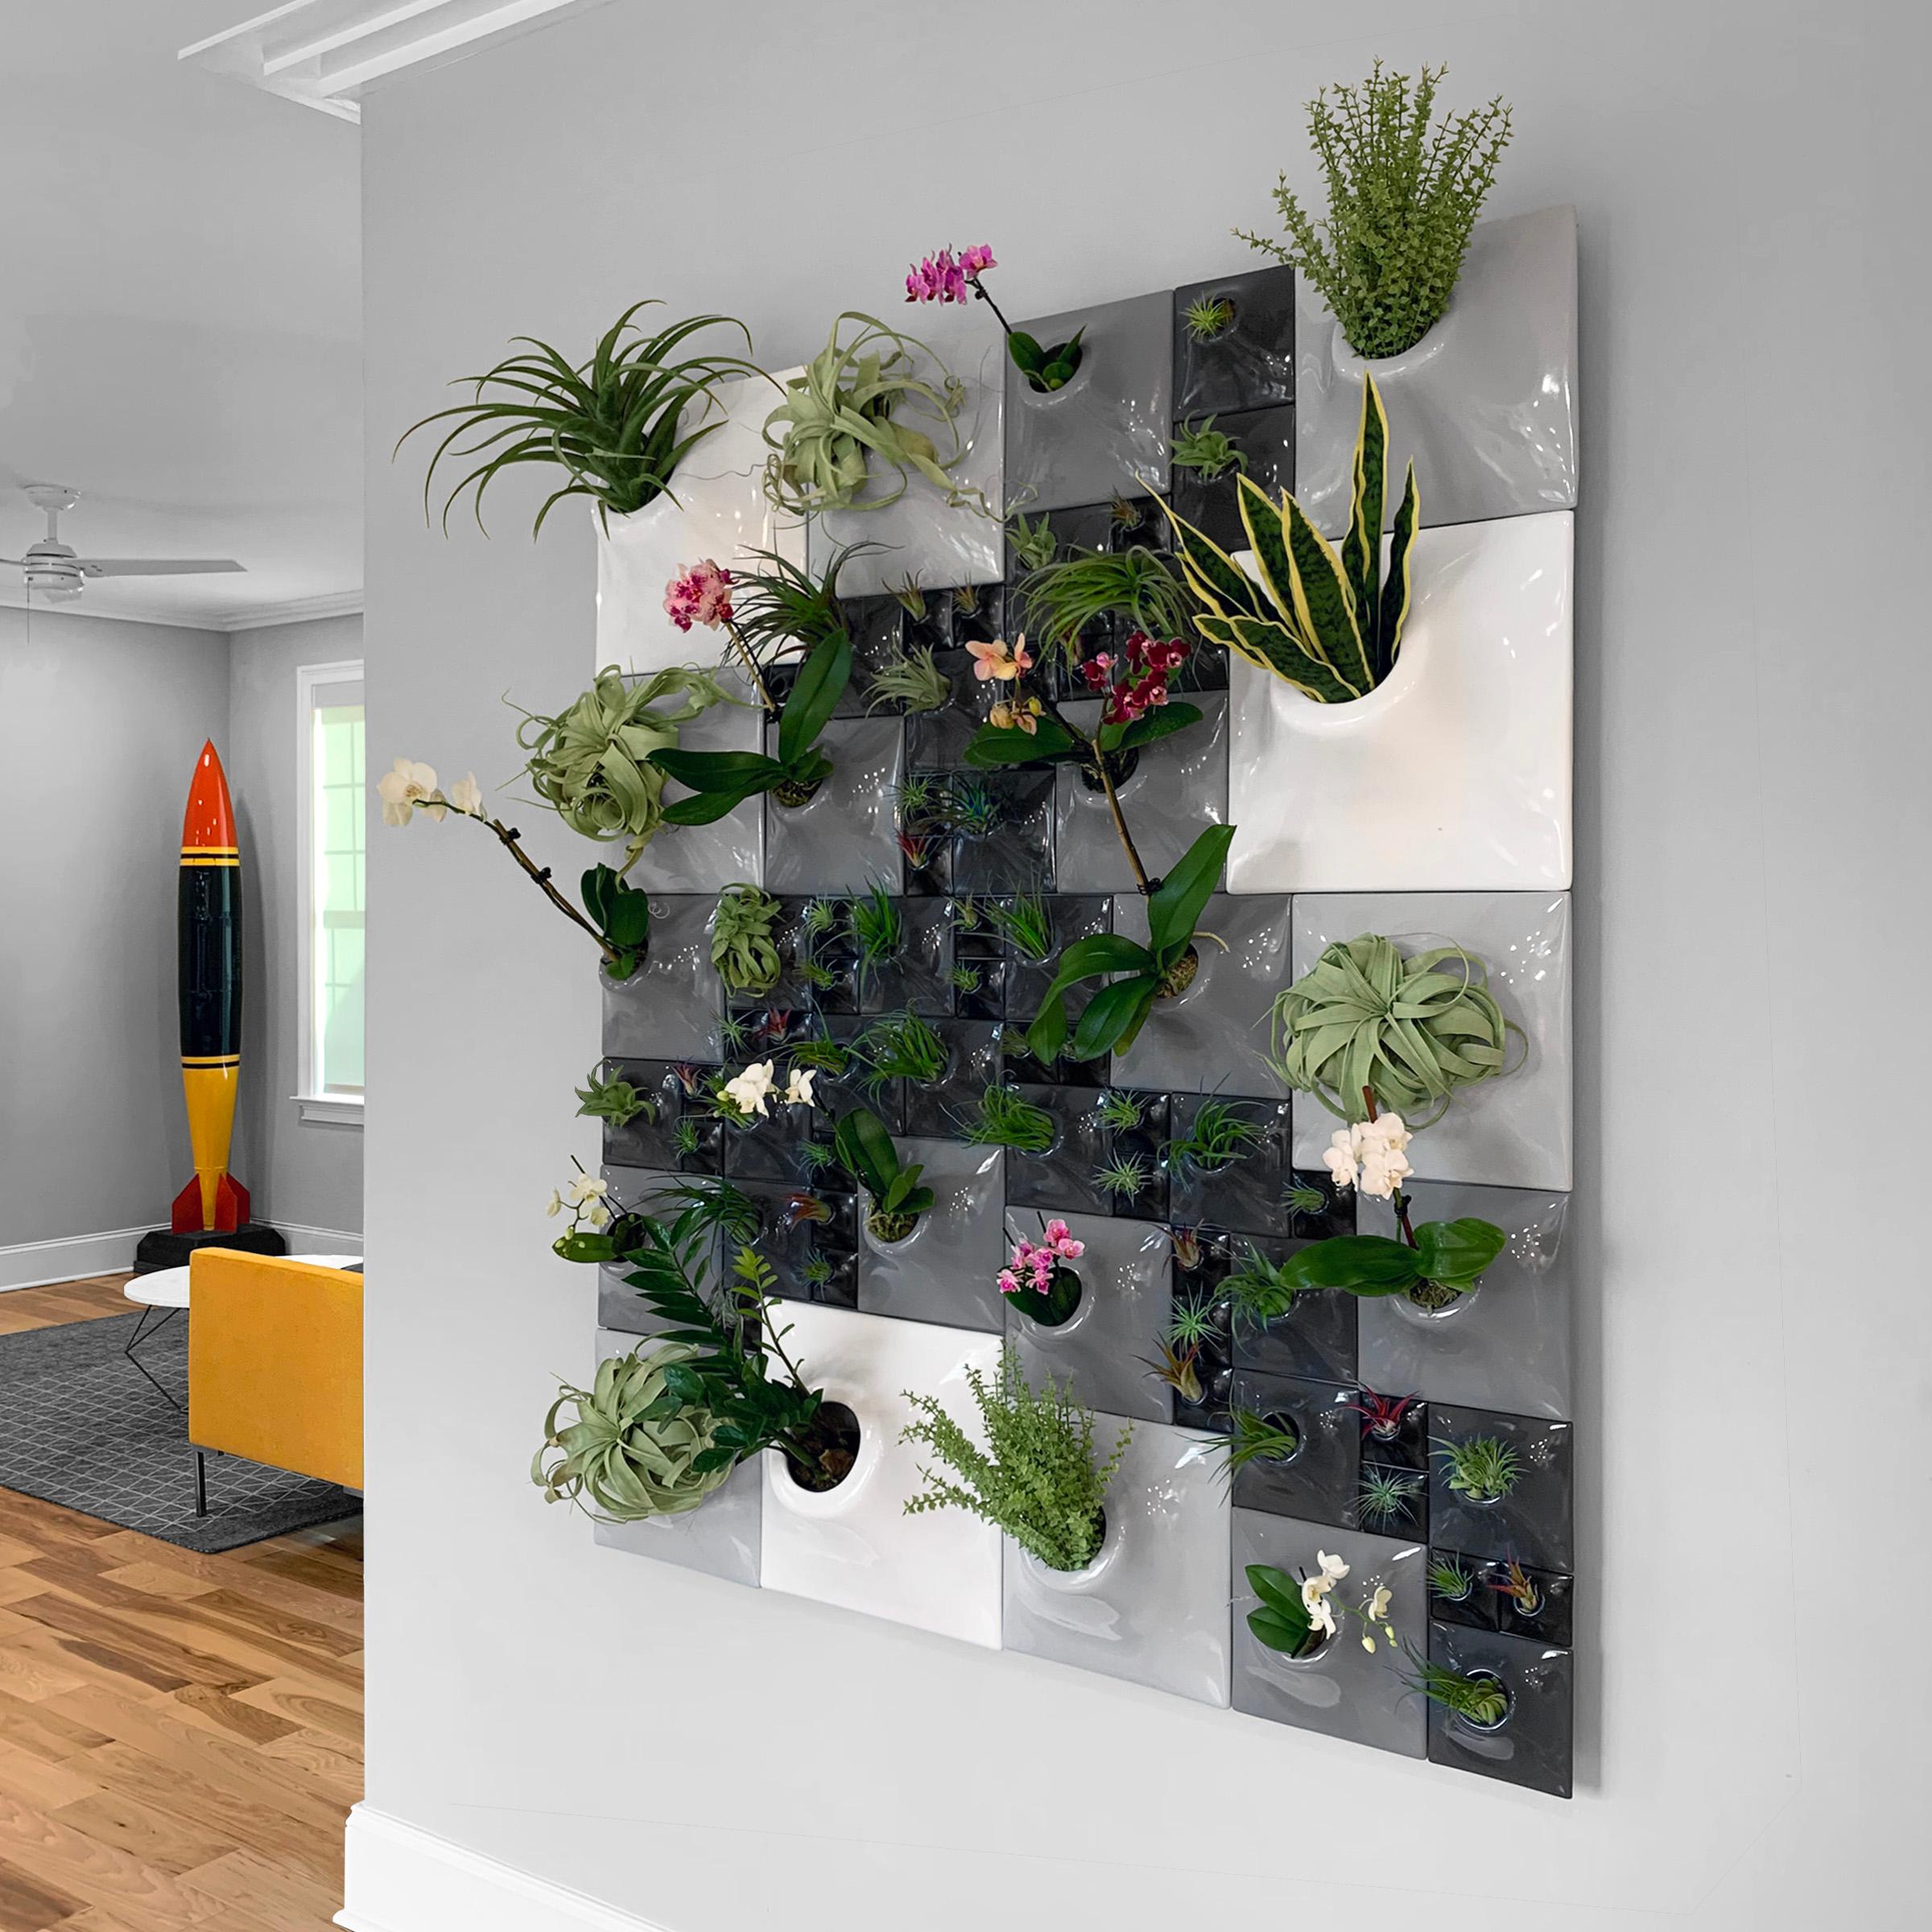 Modern Greenwall Sculpture, Plant Wall Art, Biophilic Wall Decor, Price / Sq Ft

Transform your home, office, or restaurant into an awe inspiring epicenter of biophilic design with an undulating Node Plant Wall - the only modular ceramic wall